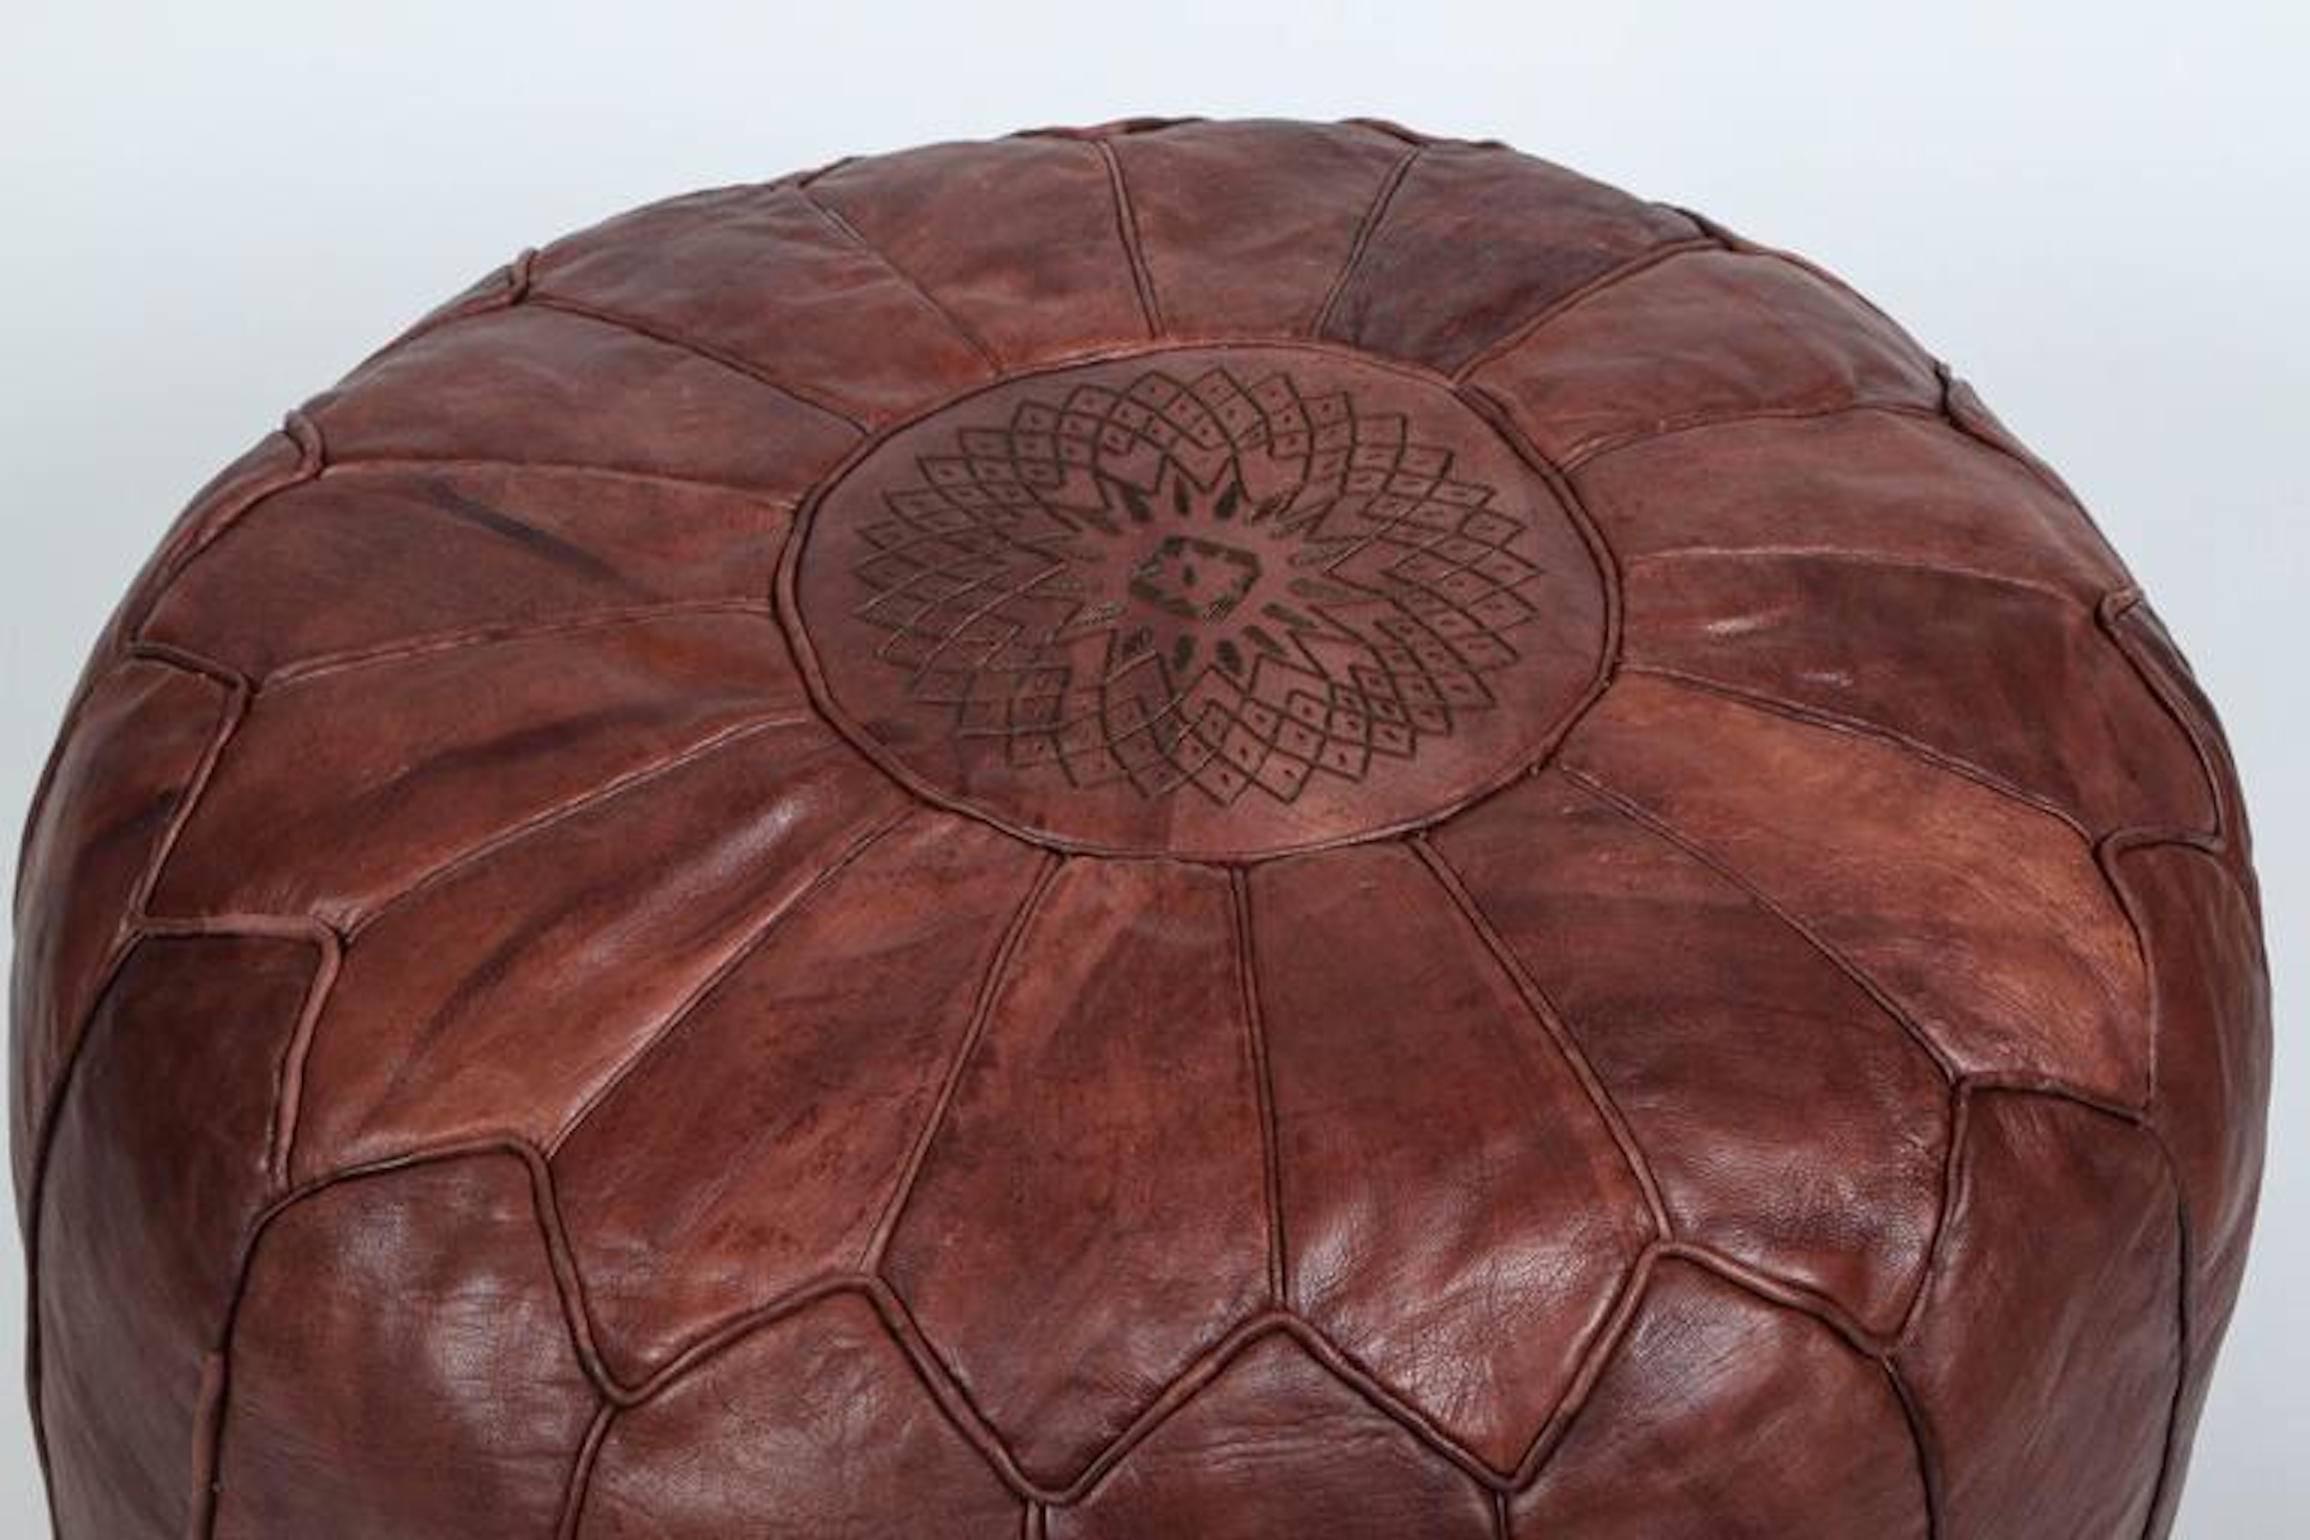 Pair of large vintage round Moroccan leather poufs, handcrafted in dark chocolate brown camel leather.
Hand tooled and embroidered on the top with the Moorish star by Moroccan artisans in Marrakech.
Nice patina.
Multiple available please contact